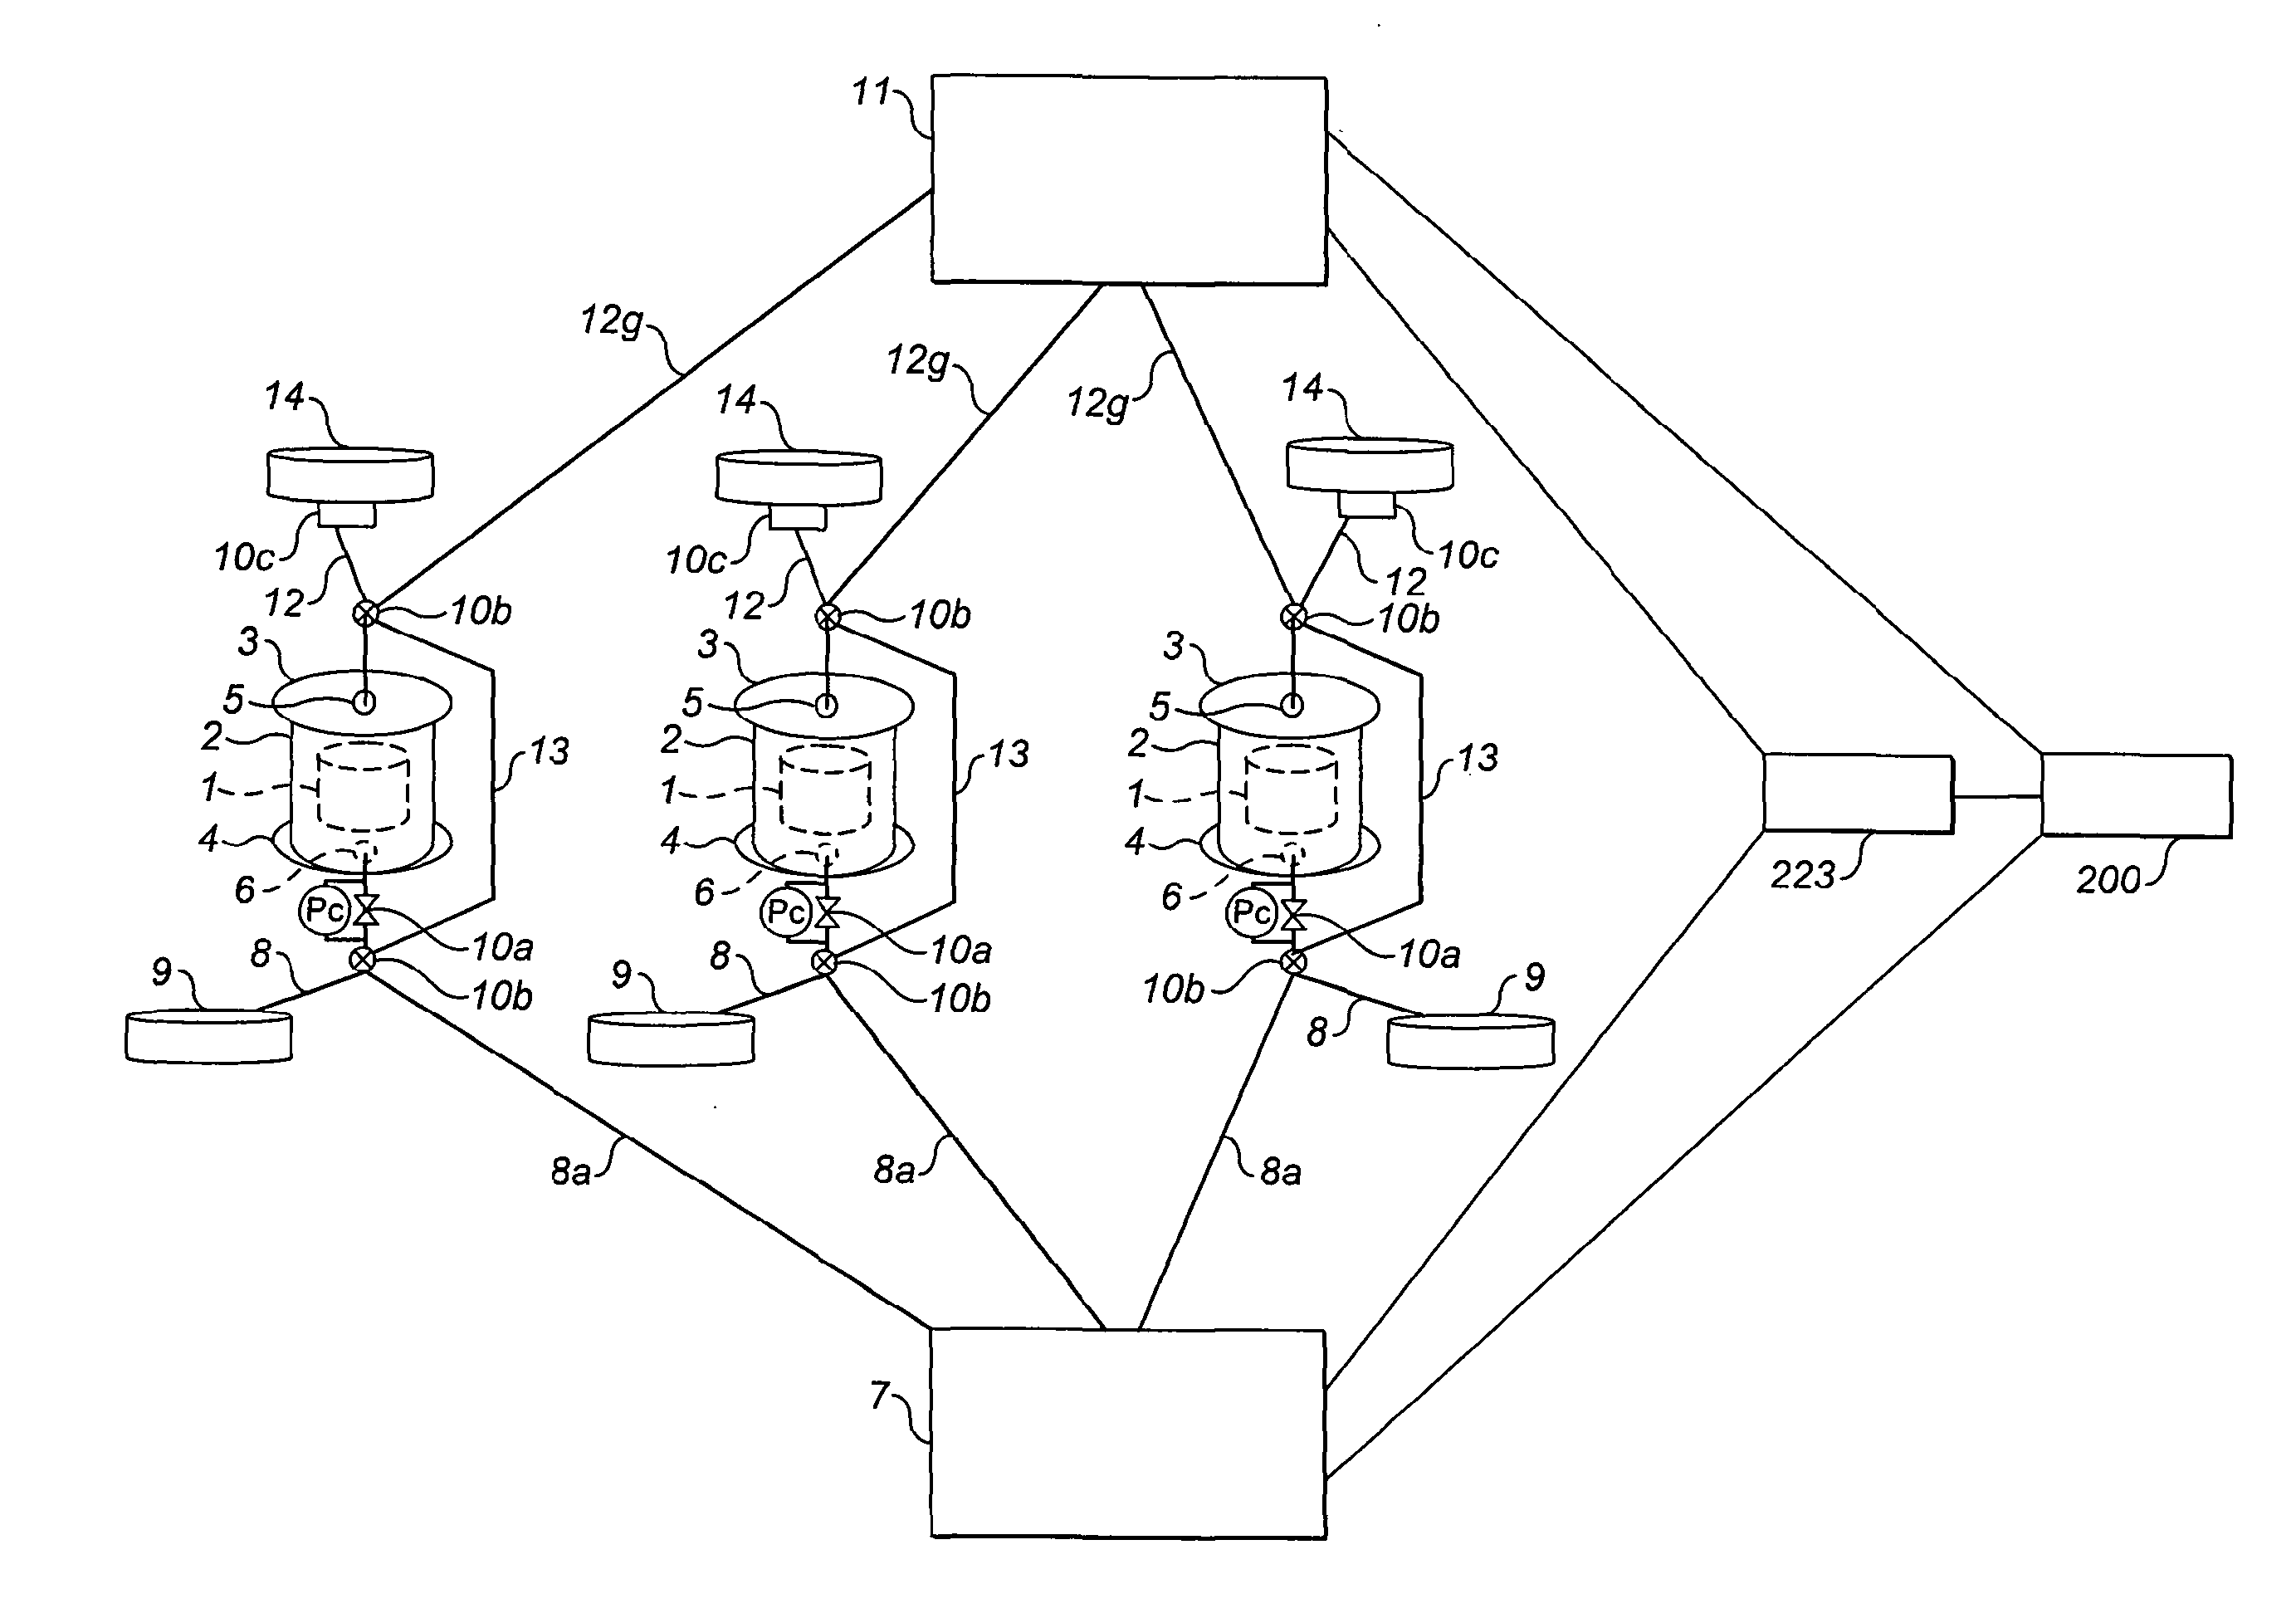 Apparatus and method for testing multiple samples